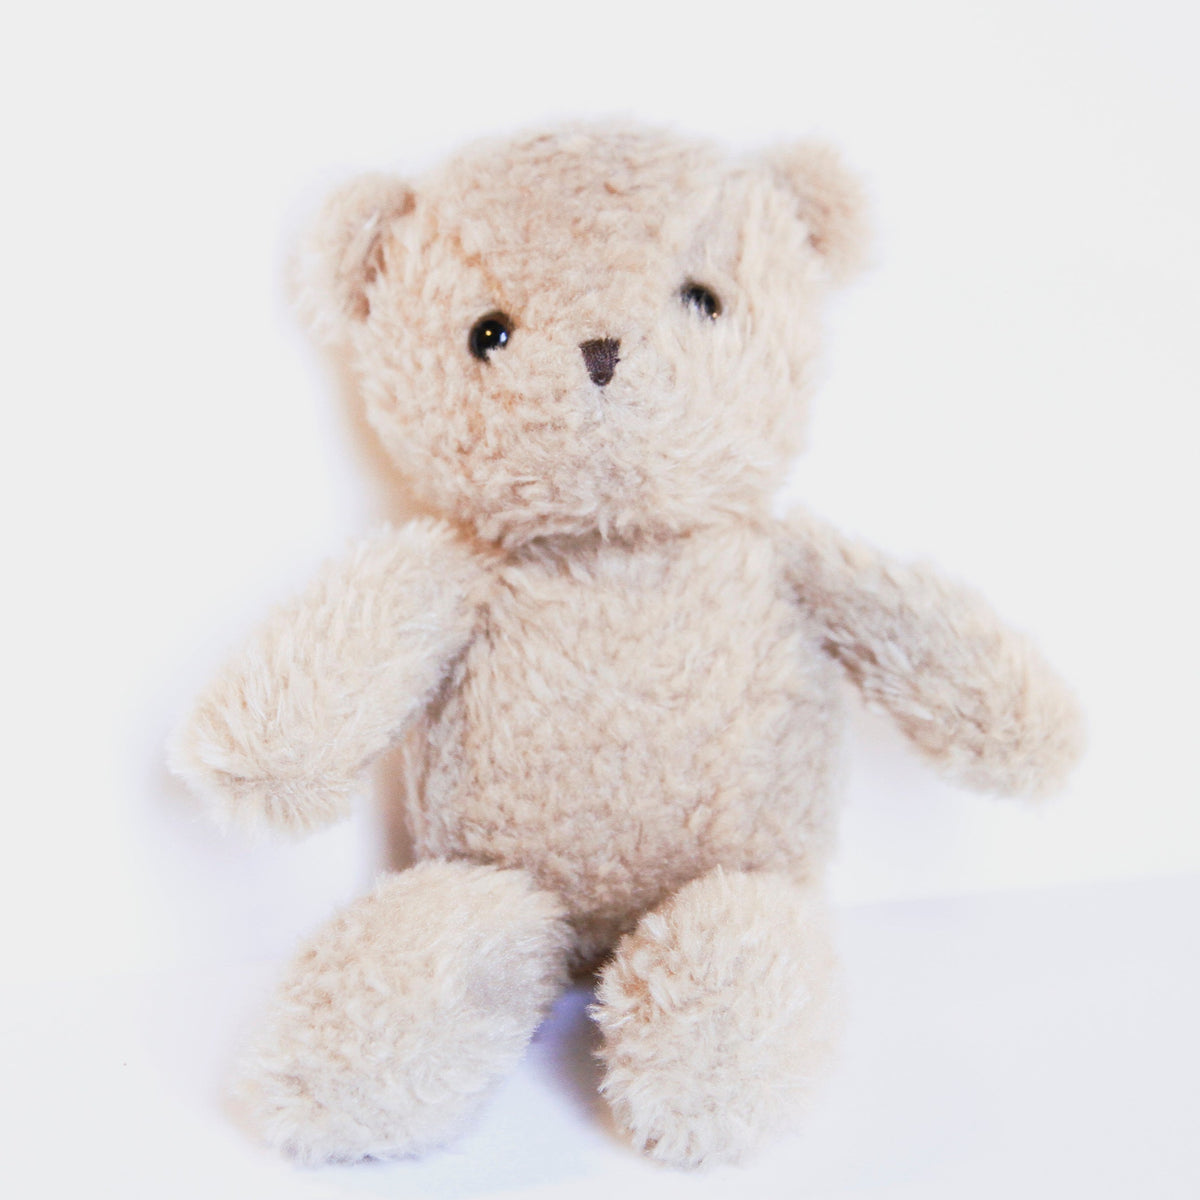 Teddy The Bear Small Toy, 47% OFF